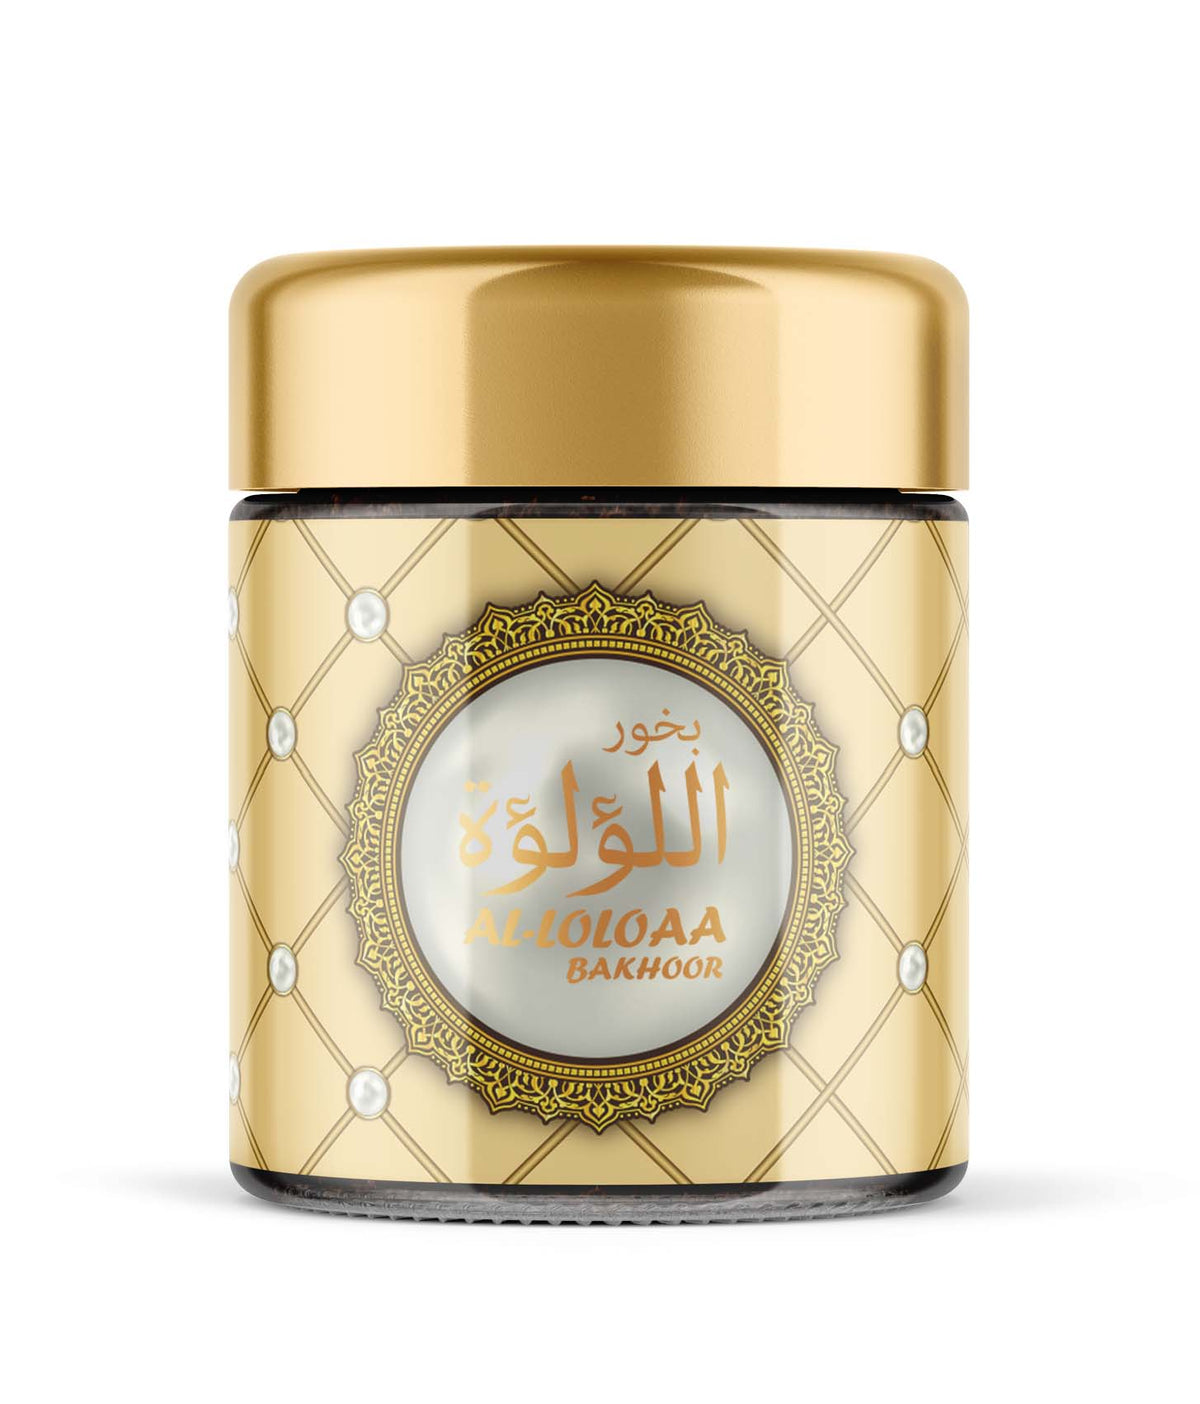 Indulge in the exquisite blend of high quality Oud oil, Oud wood, Sandalwood, Amber, Roses, and Saffron in Bakhoor Incense Al-Loloaa, exclusively at Hikmah Boutique. Elevate your ambiance with the finest Bakhoor, Bakhour, Oud, and incense collection, all offered at reasonable prices.